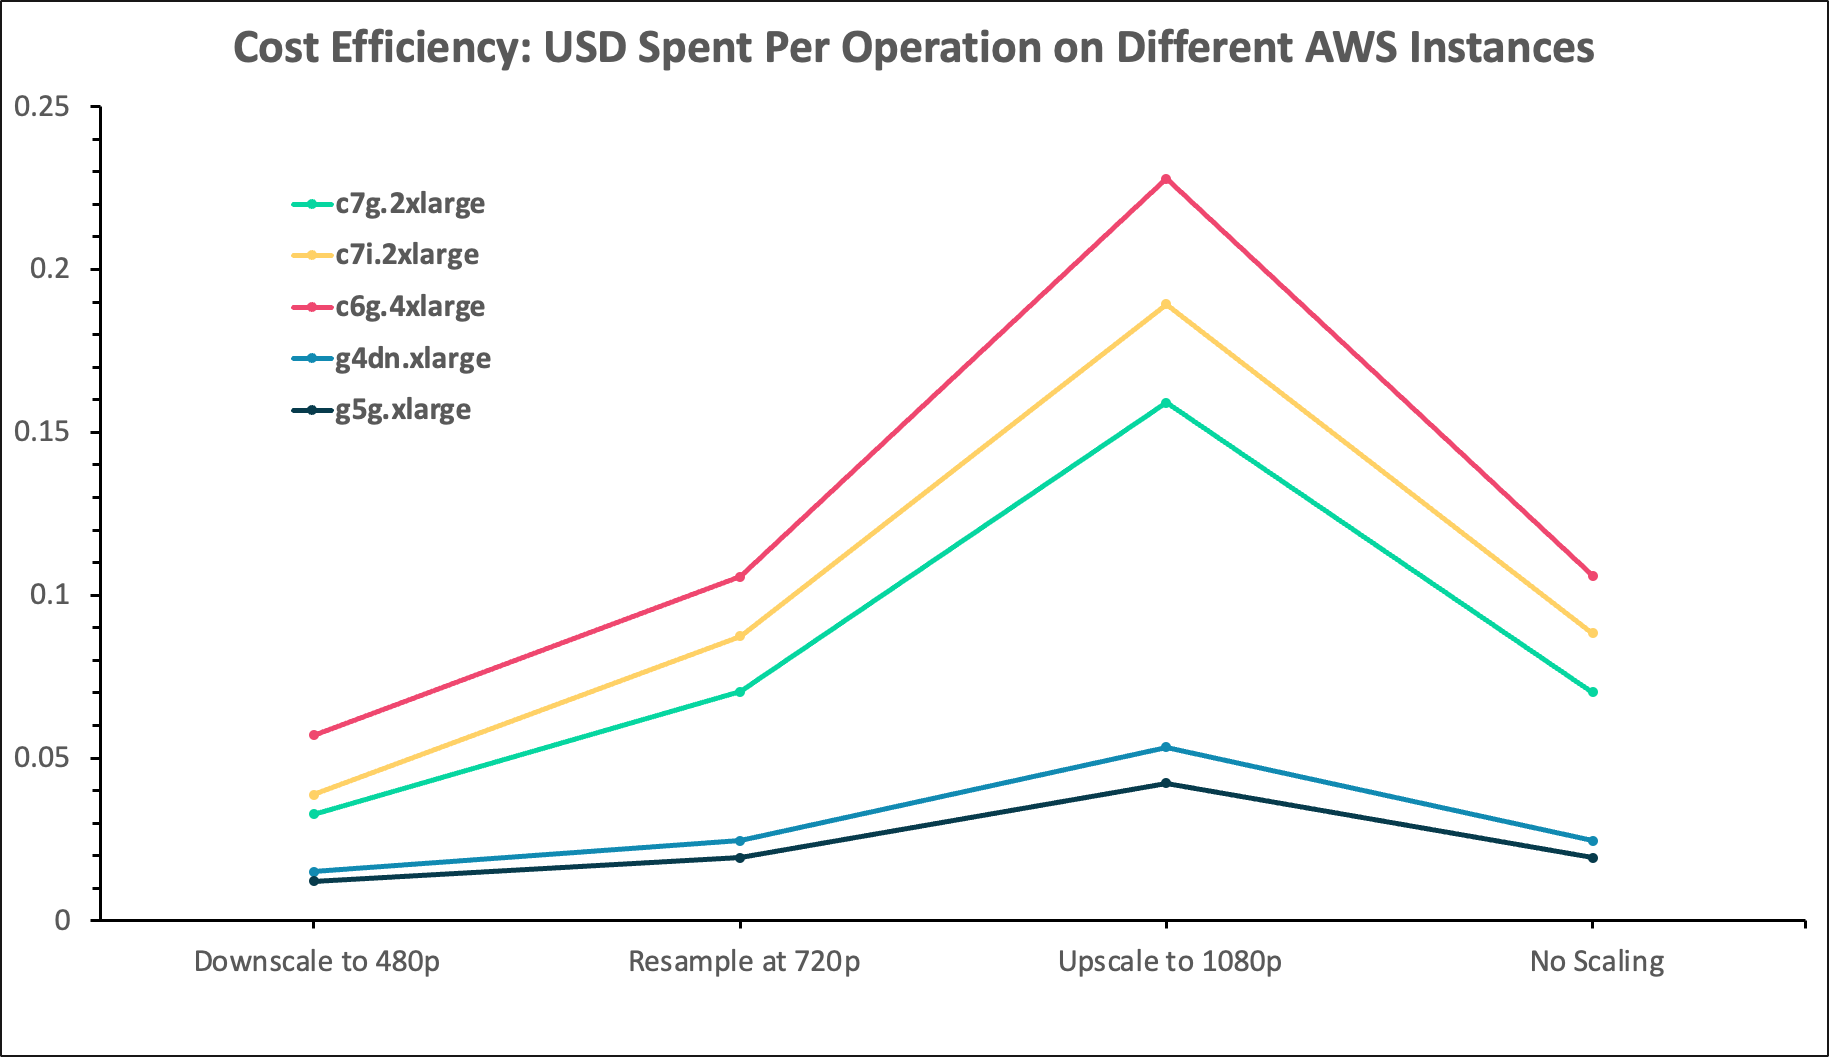 Cost Efficiency: USD Spent Per Operation on Different AWS Instances